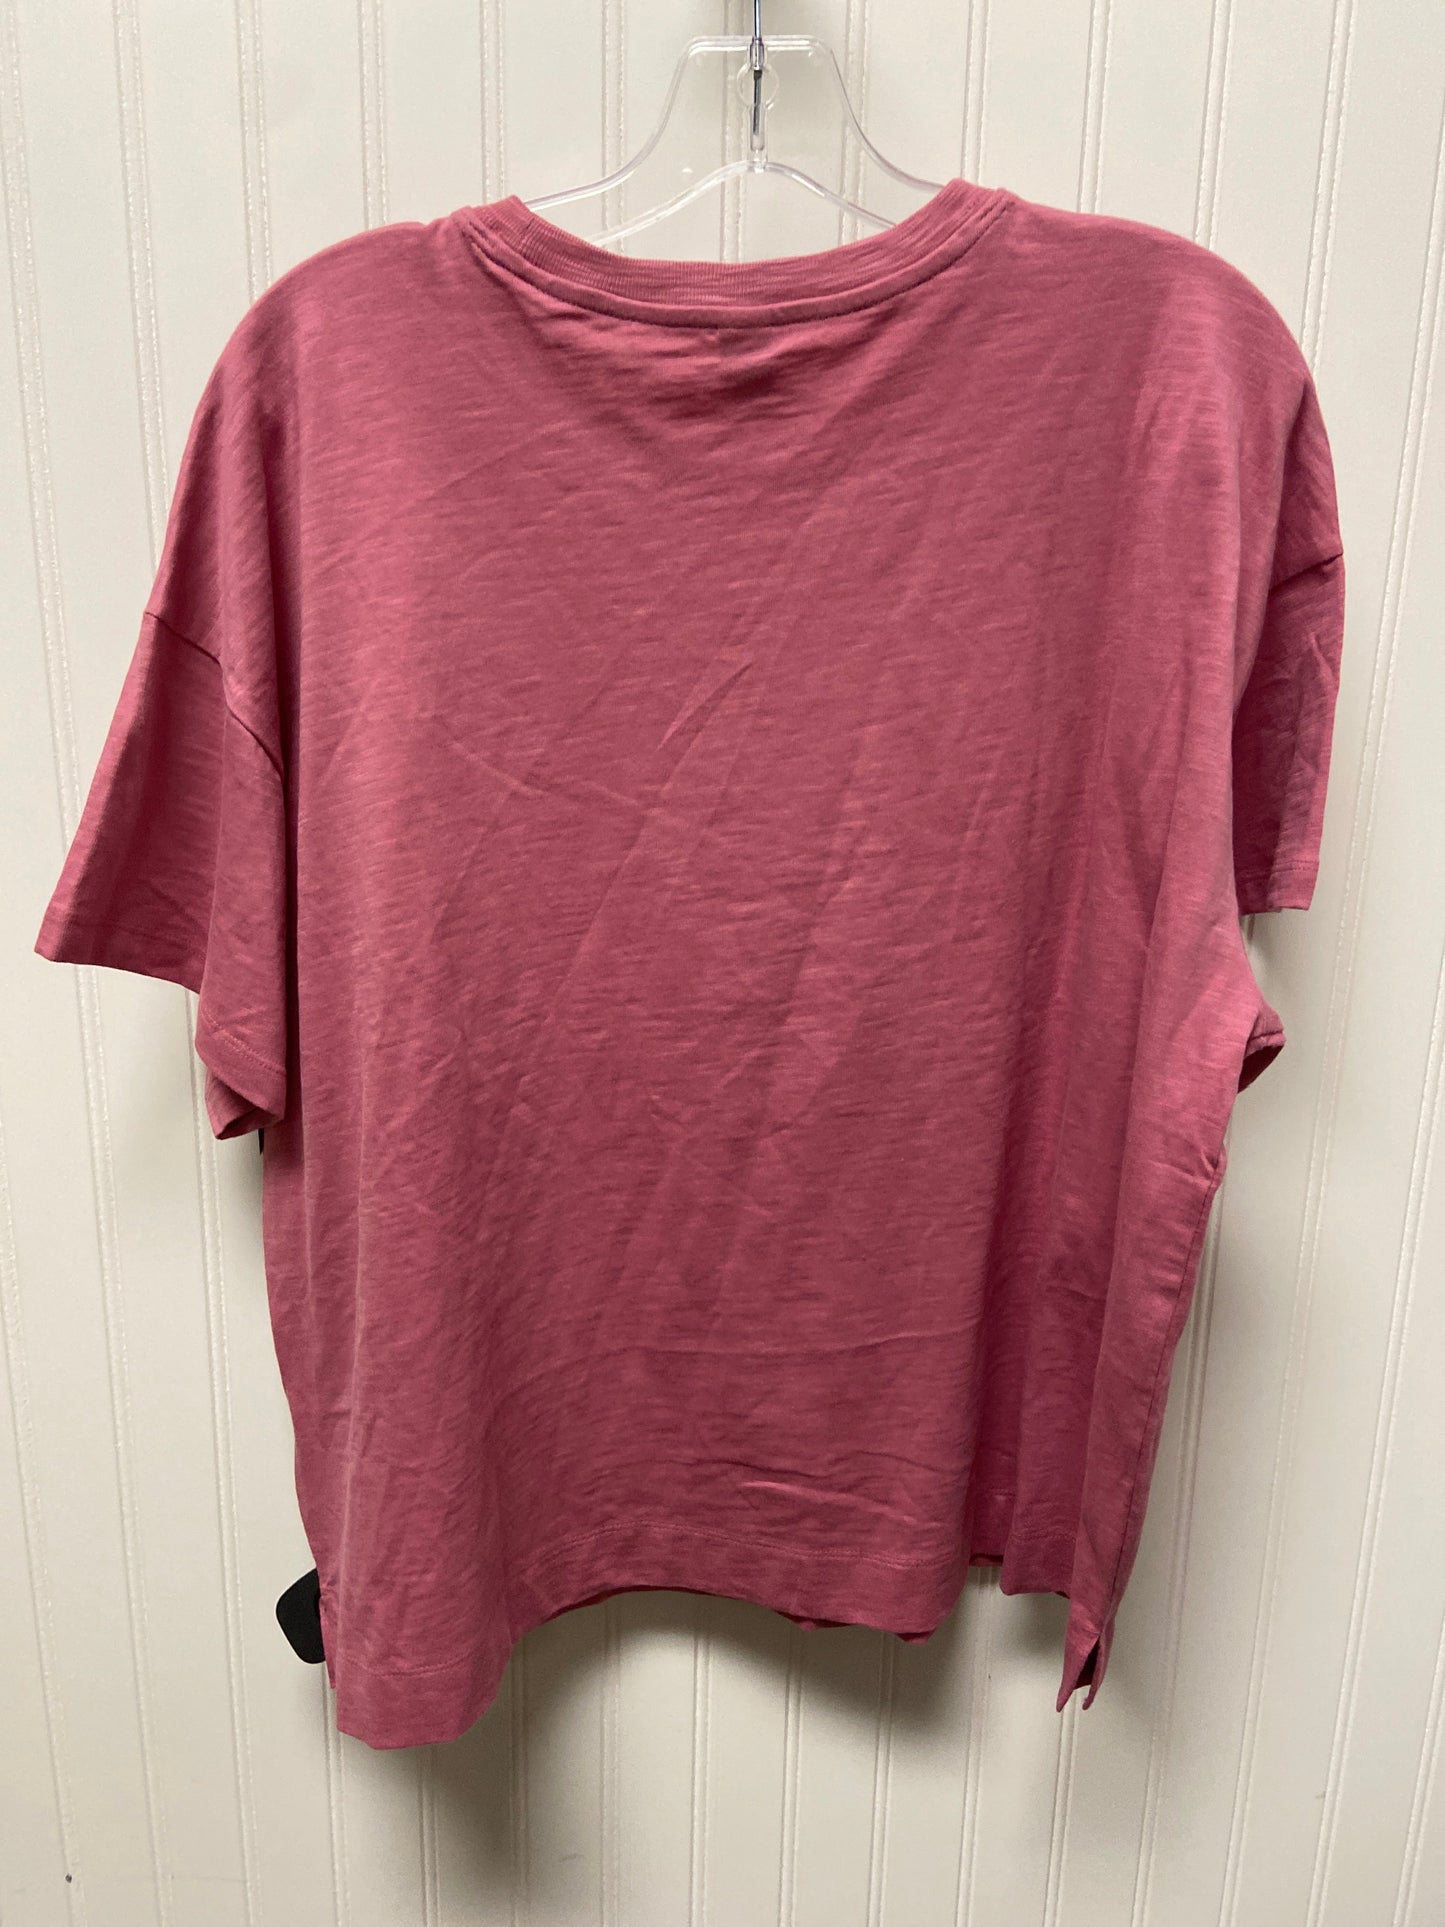 Pink Top Short Sleeve Old Navy, Size Xl